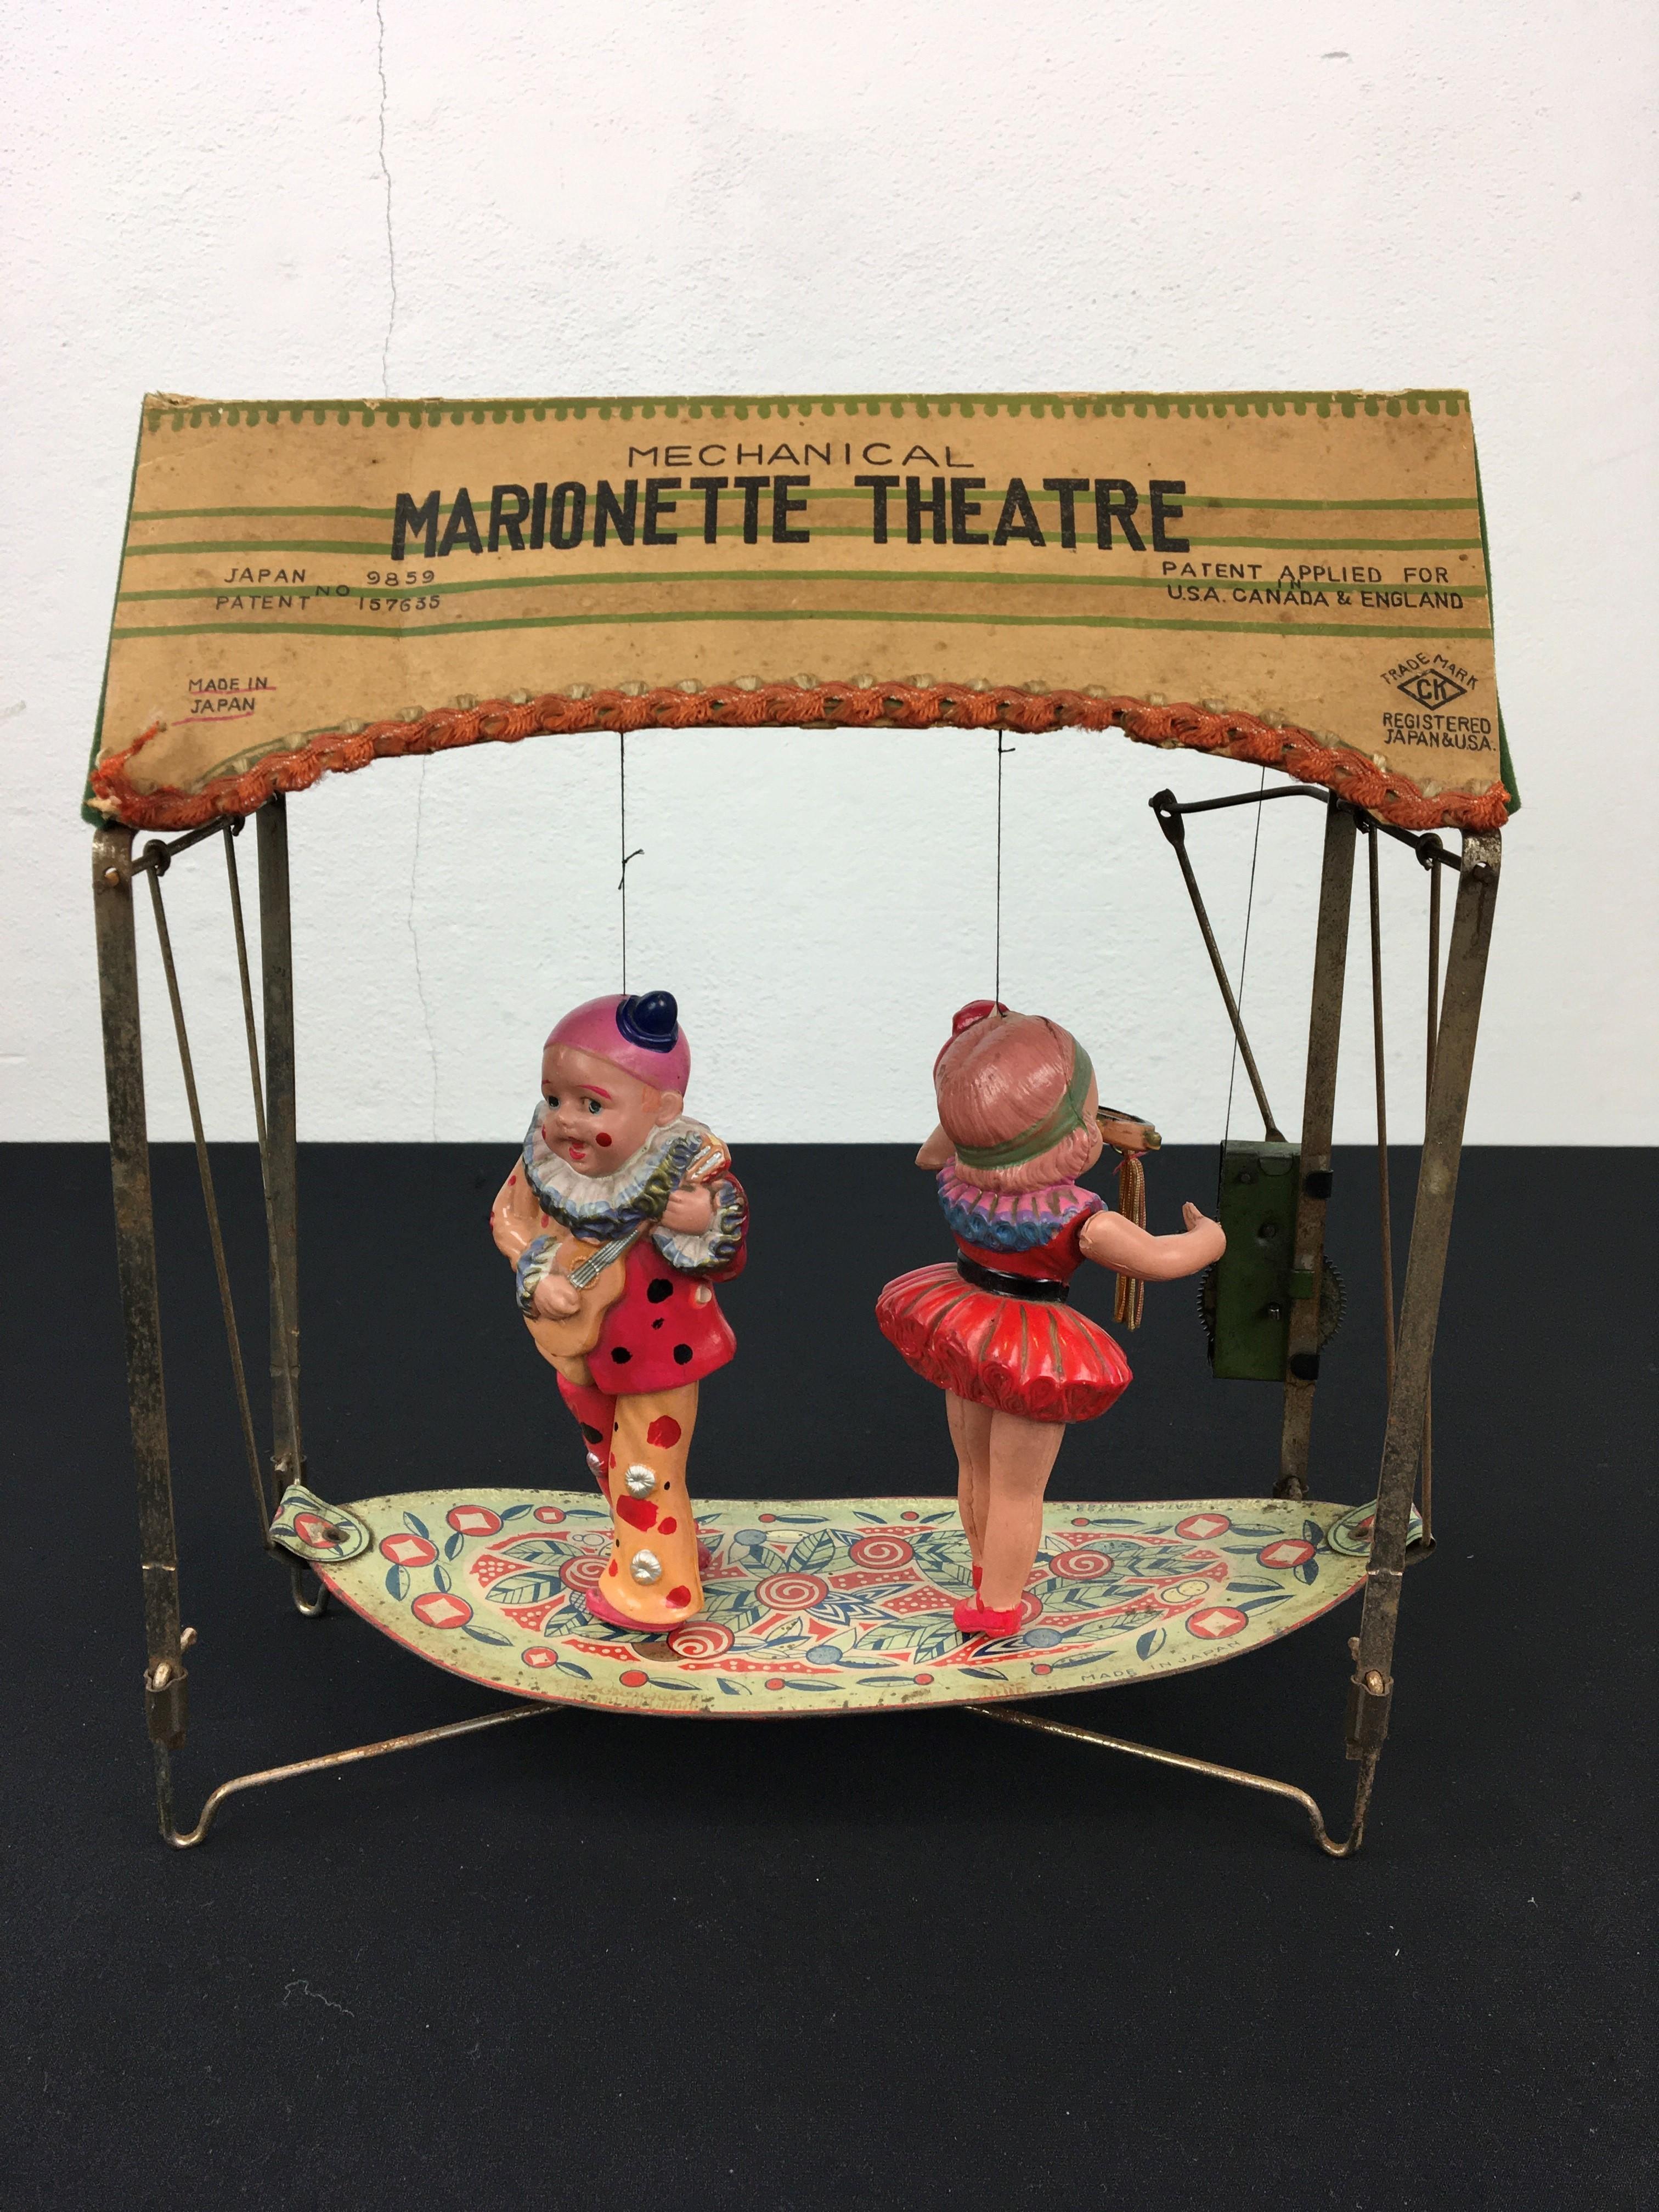 Antique mechanical marionette theatre toy by CK made in Japan. 
A clockwork tin - metal swing with 2 adorable celluloid puppets or dolls: a clown and a ballerina.
By the movement of the swing it seems that the boy and girl are dancing. 
At the back